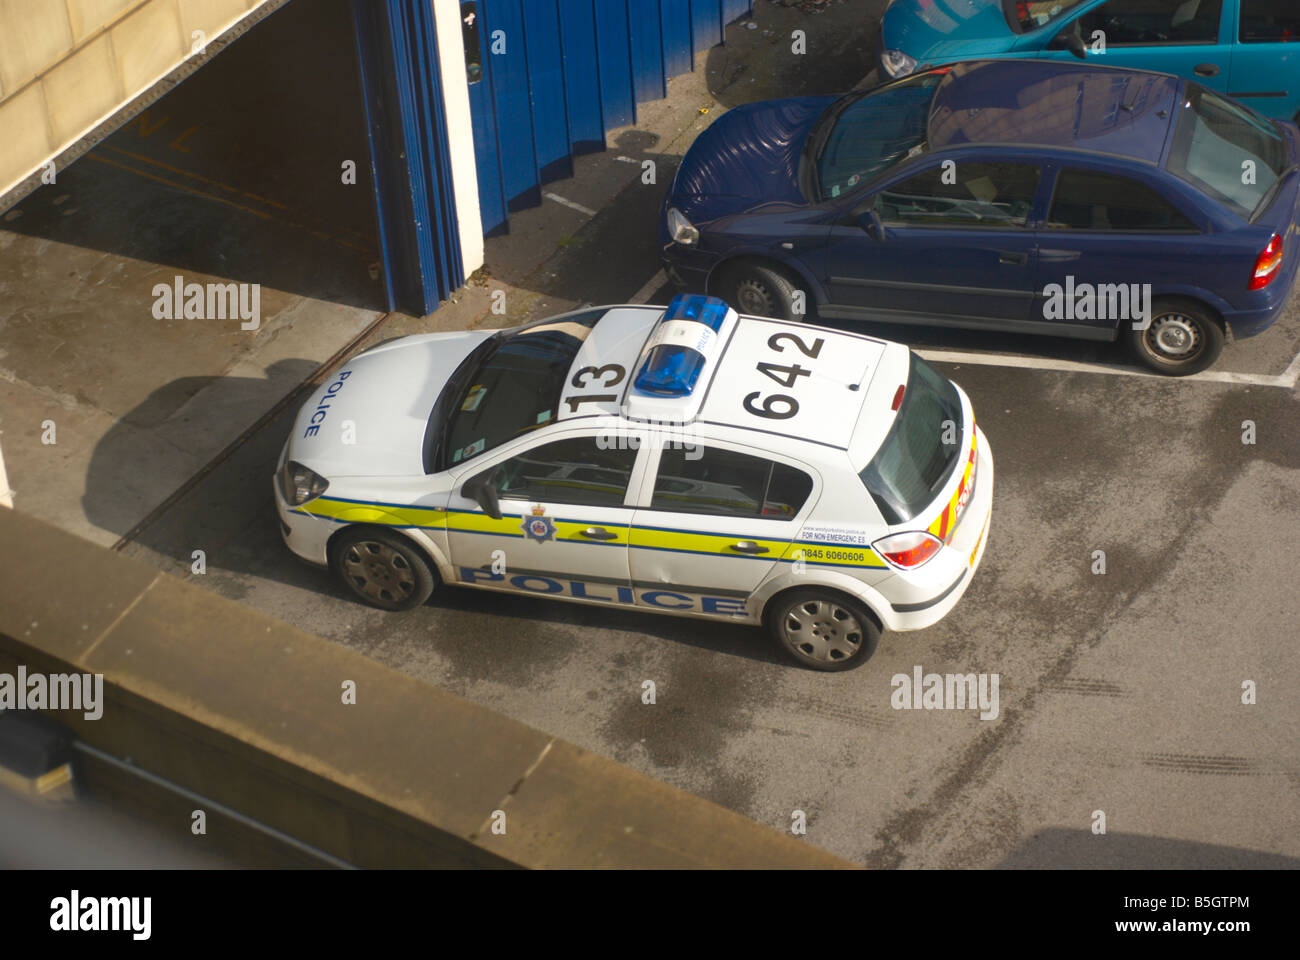 Police car in a West Yorkshire police station Stock Photo